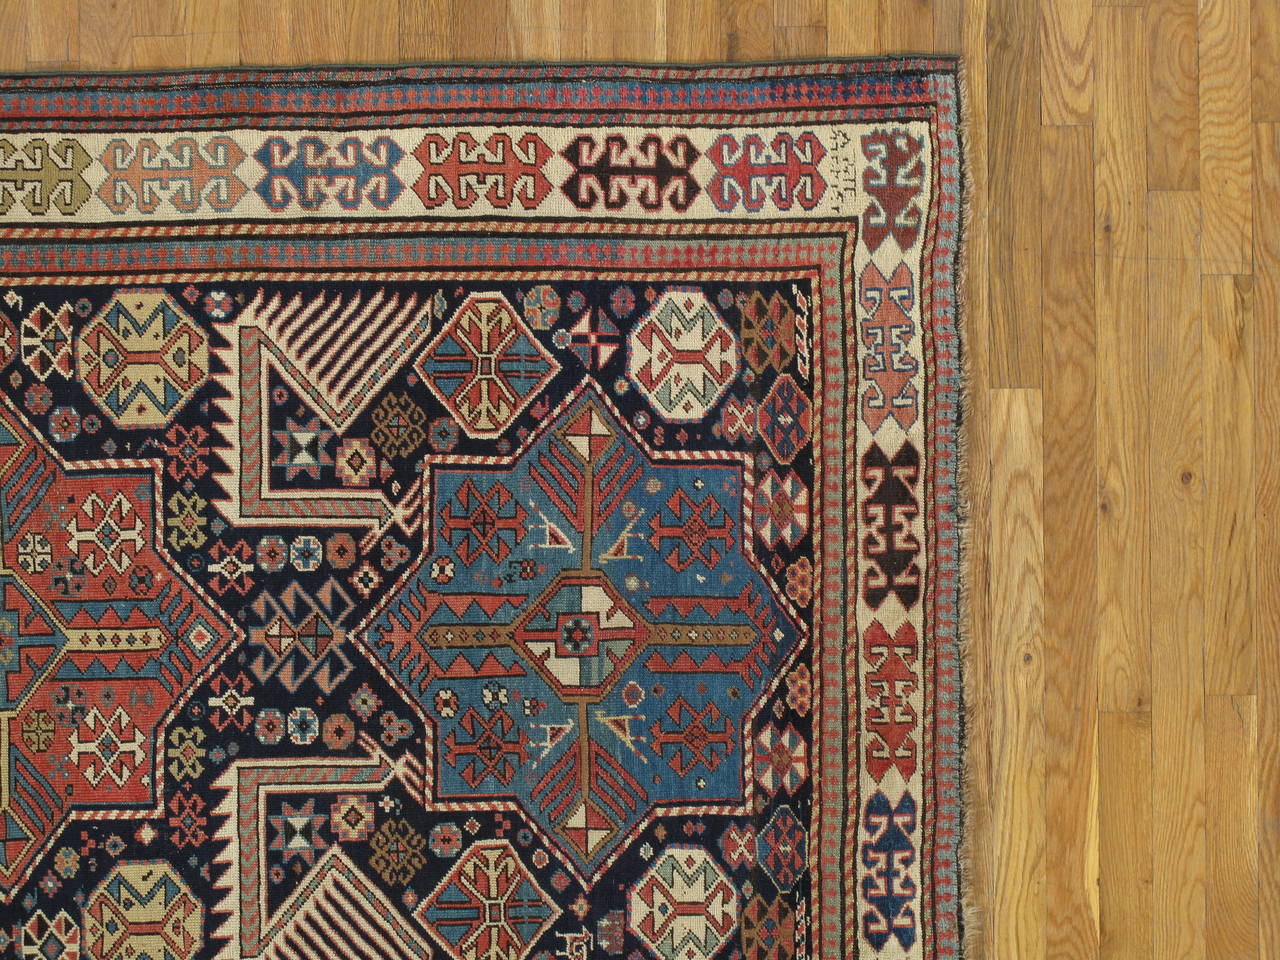 Shirvan rugs are often the most sought after antique rugs from the Caucasus. Shirvan rugs were made not far from those of Kuba, which are closely related in terms of design and coloration. But Shirvans tend to be distinguished by a larger, more